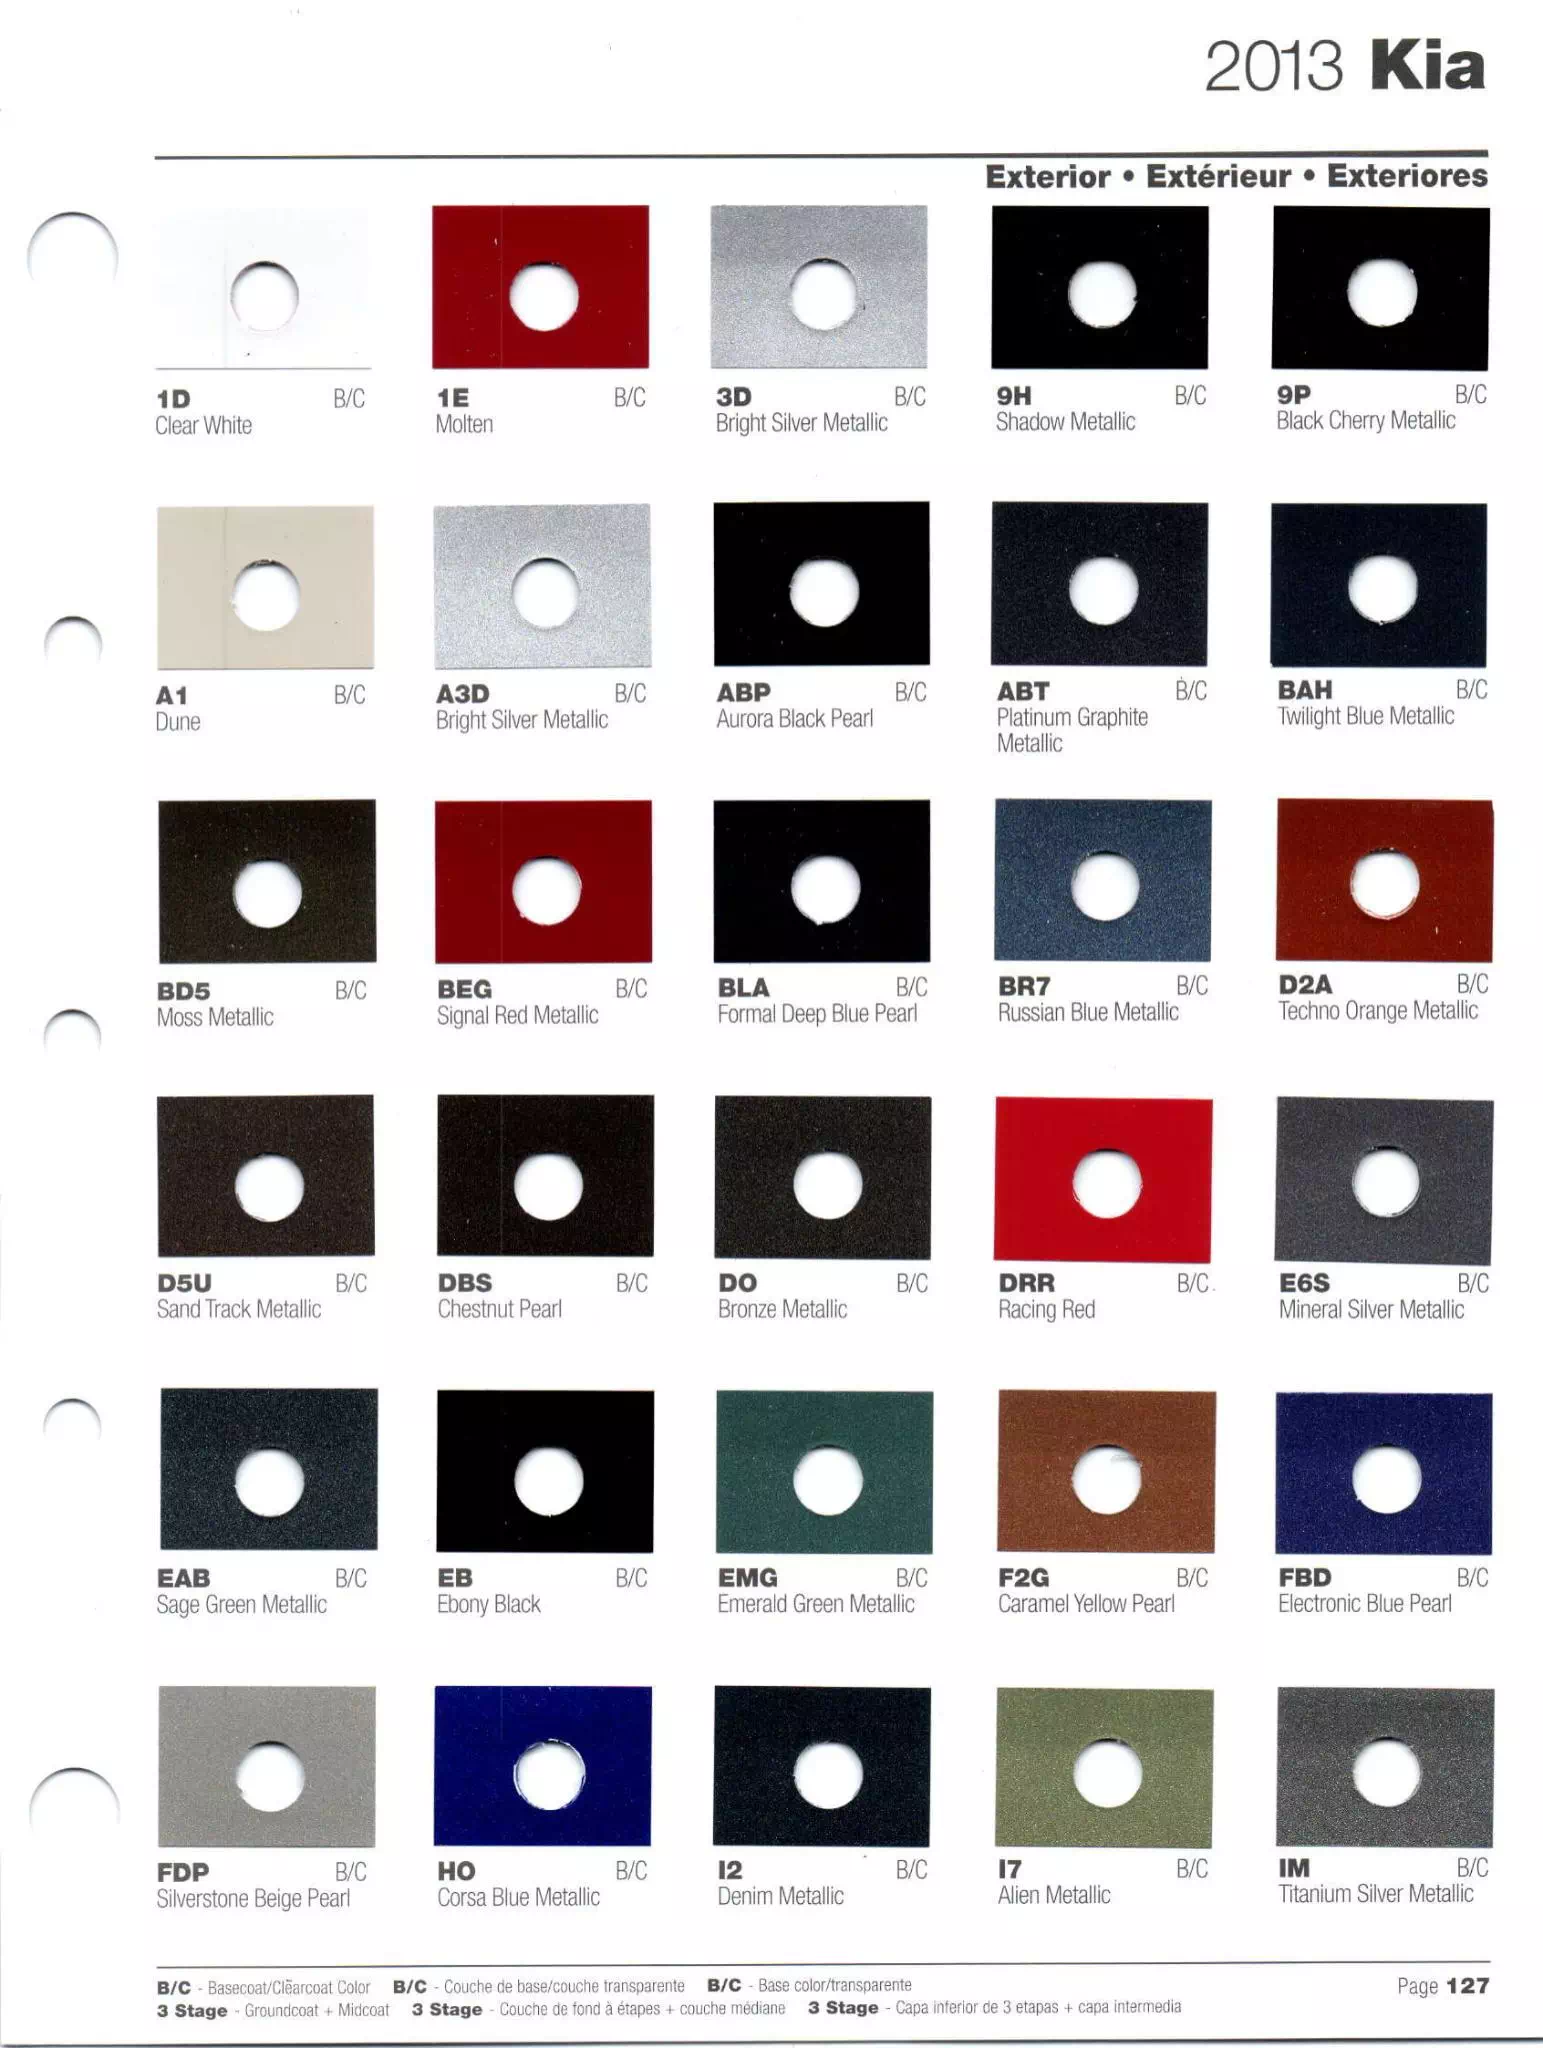 Exterior Paint Colors for Kia Vehicles in 2013